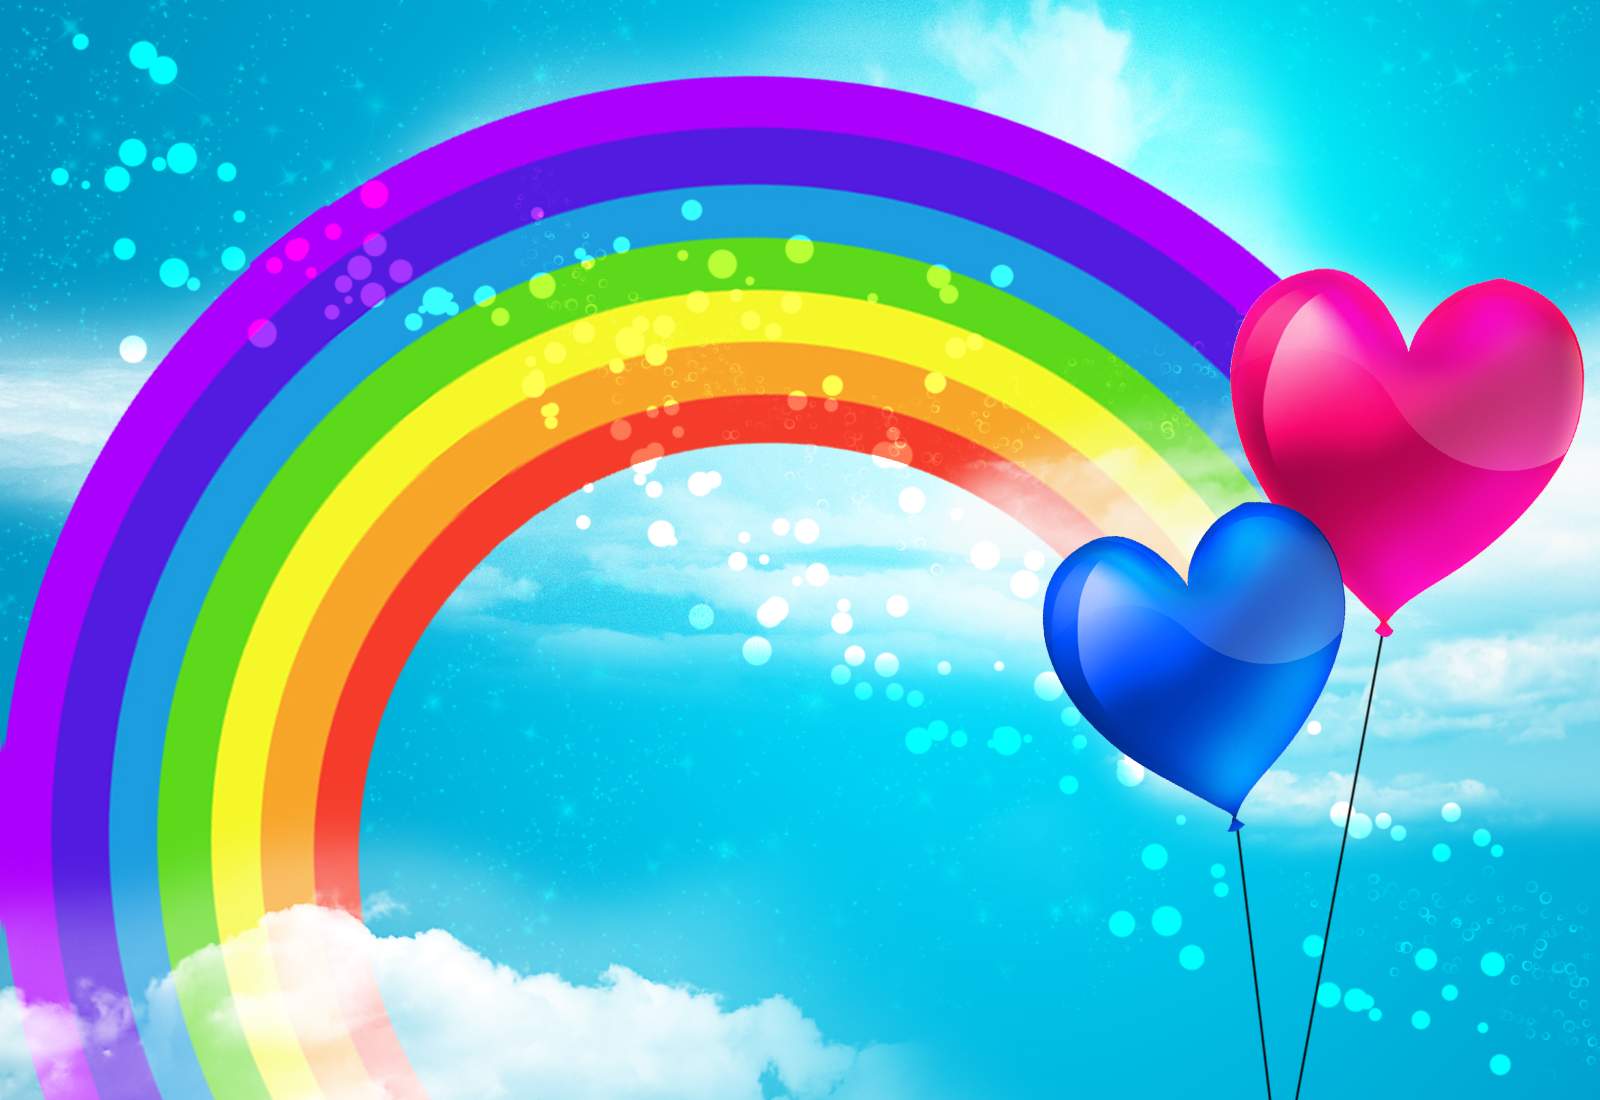 Free Picture Of Rainbow, Download Free Picture Of Rainbow png images